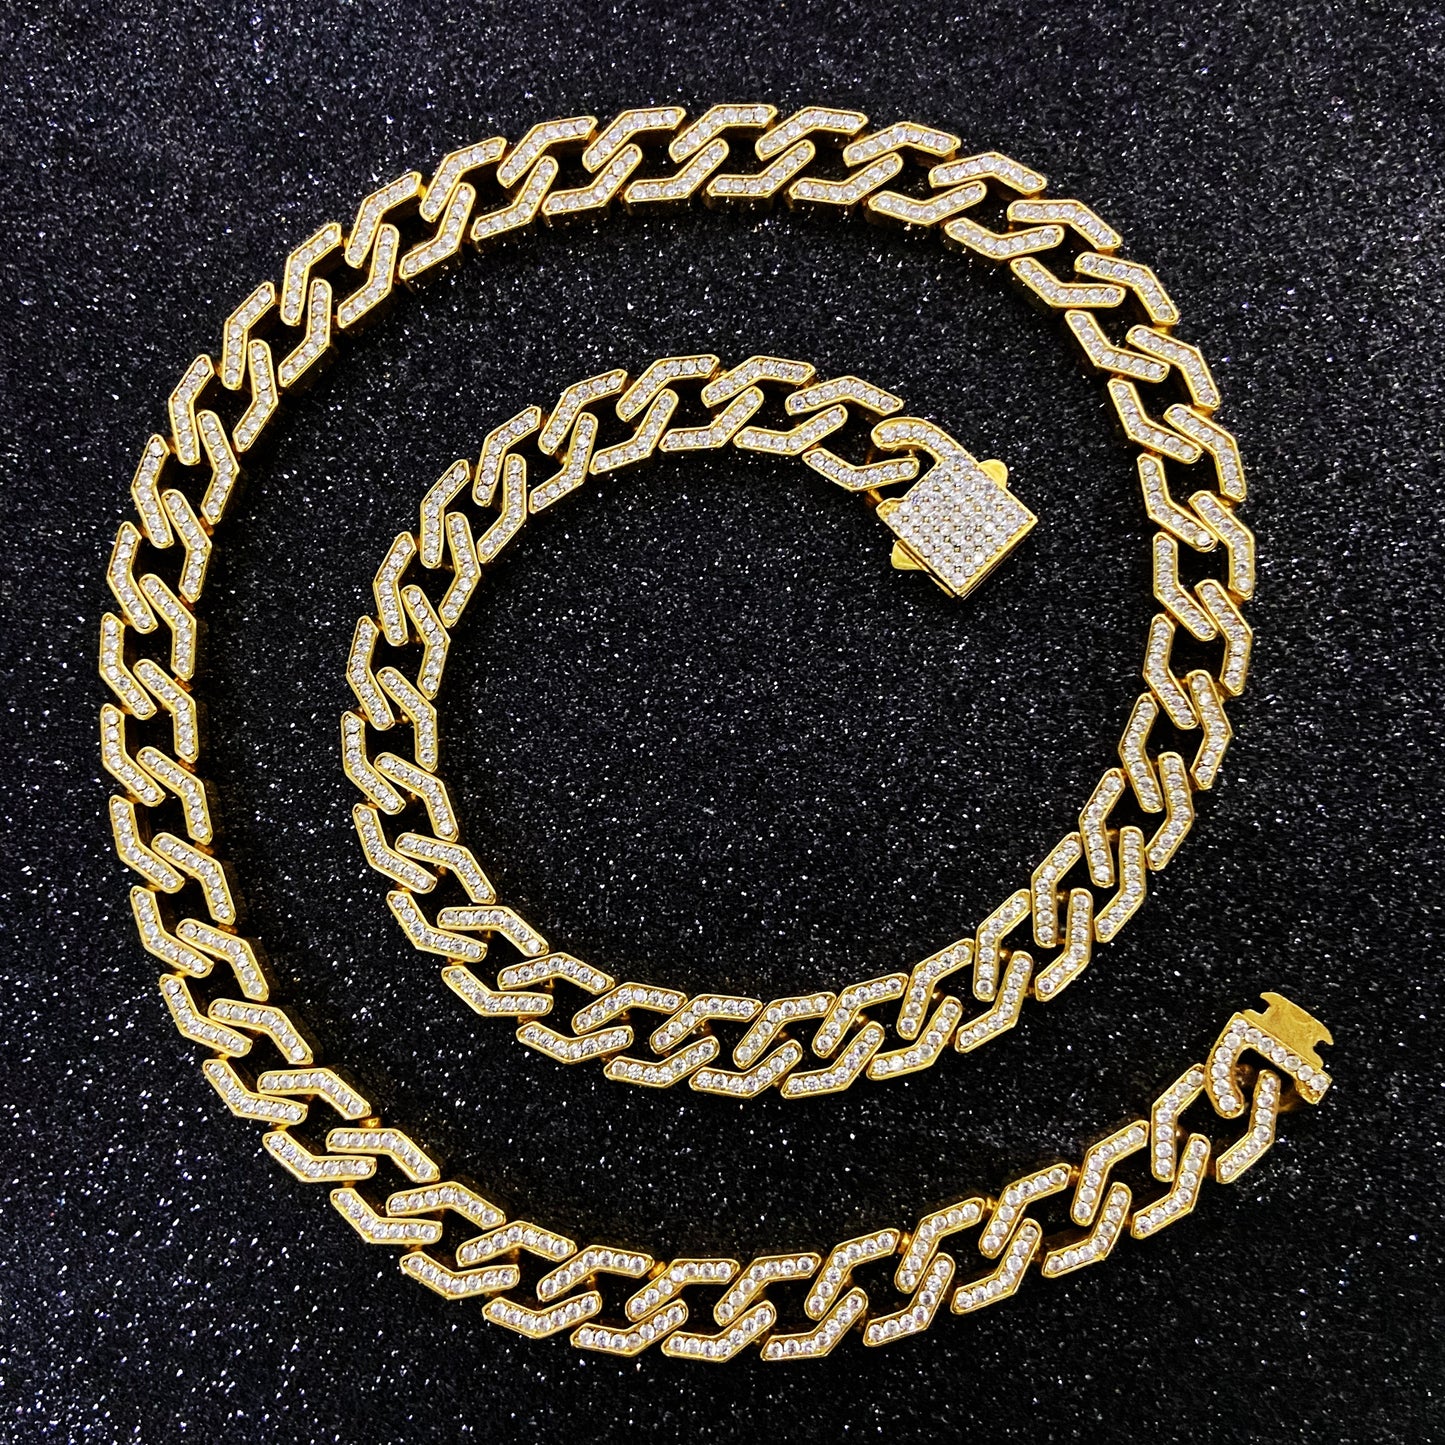 Cuban Link Chain Bracelets and Nekclaces With High Quality Rhinstones Double Gold plating